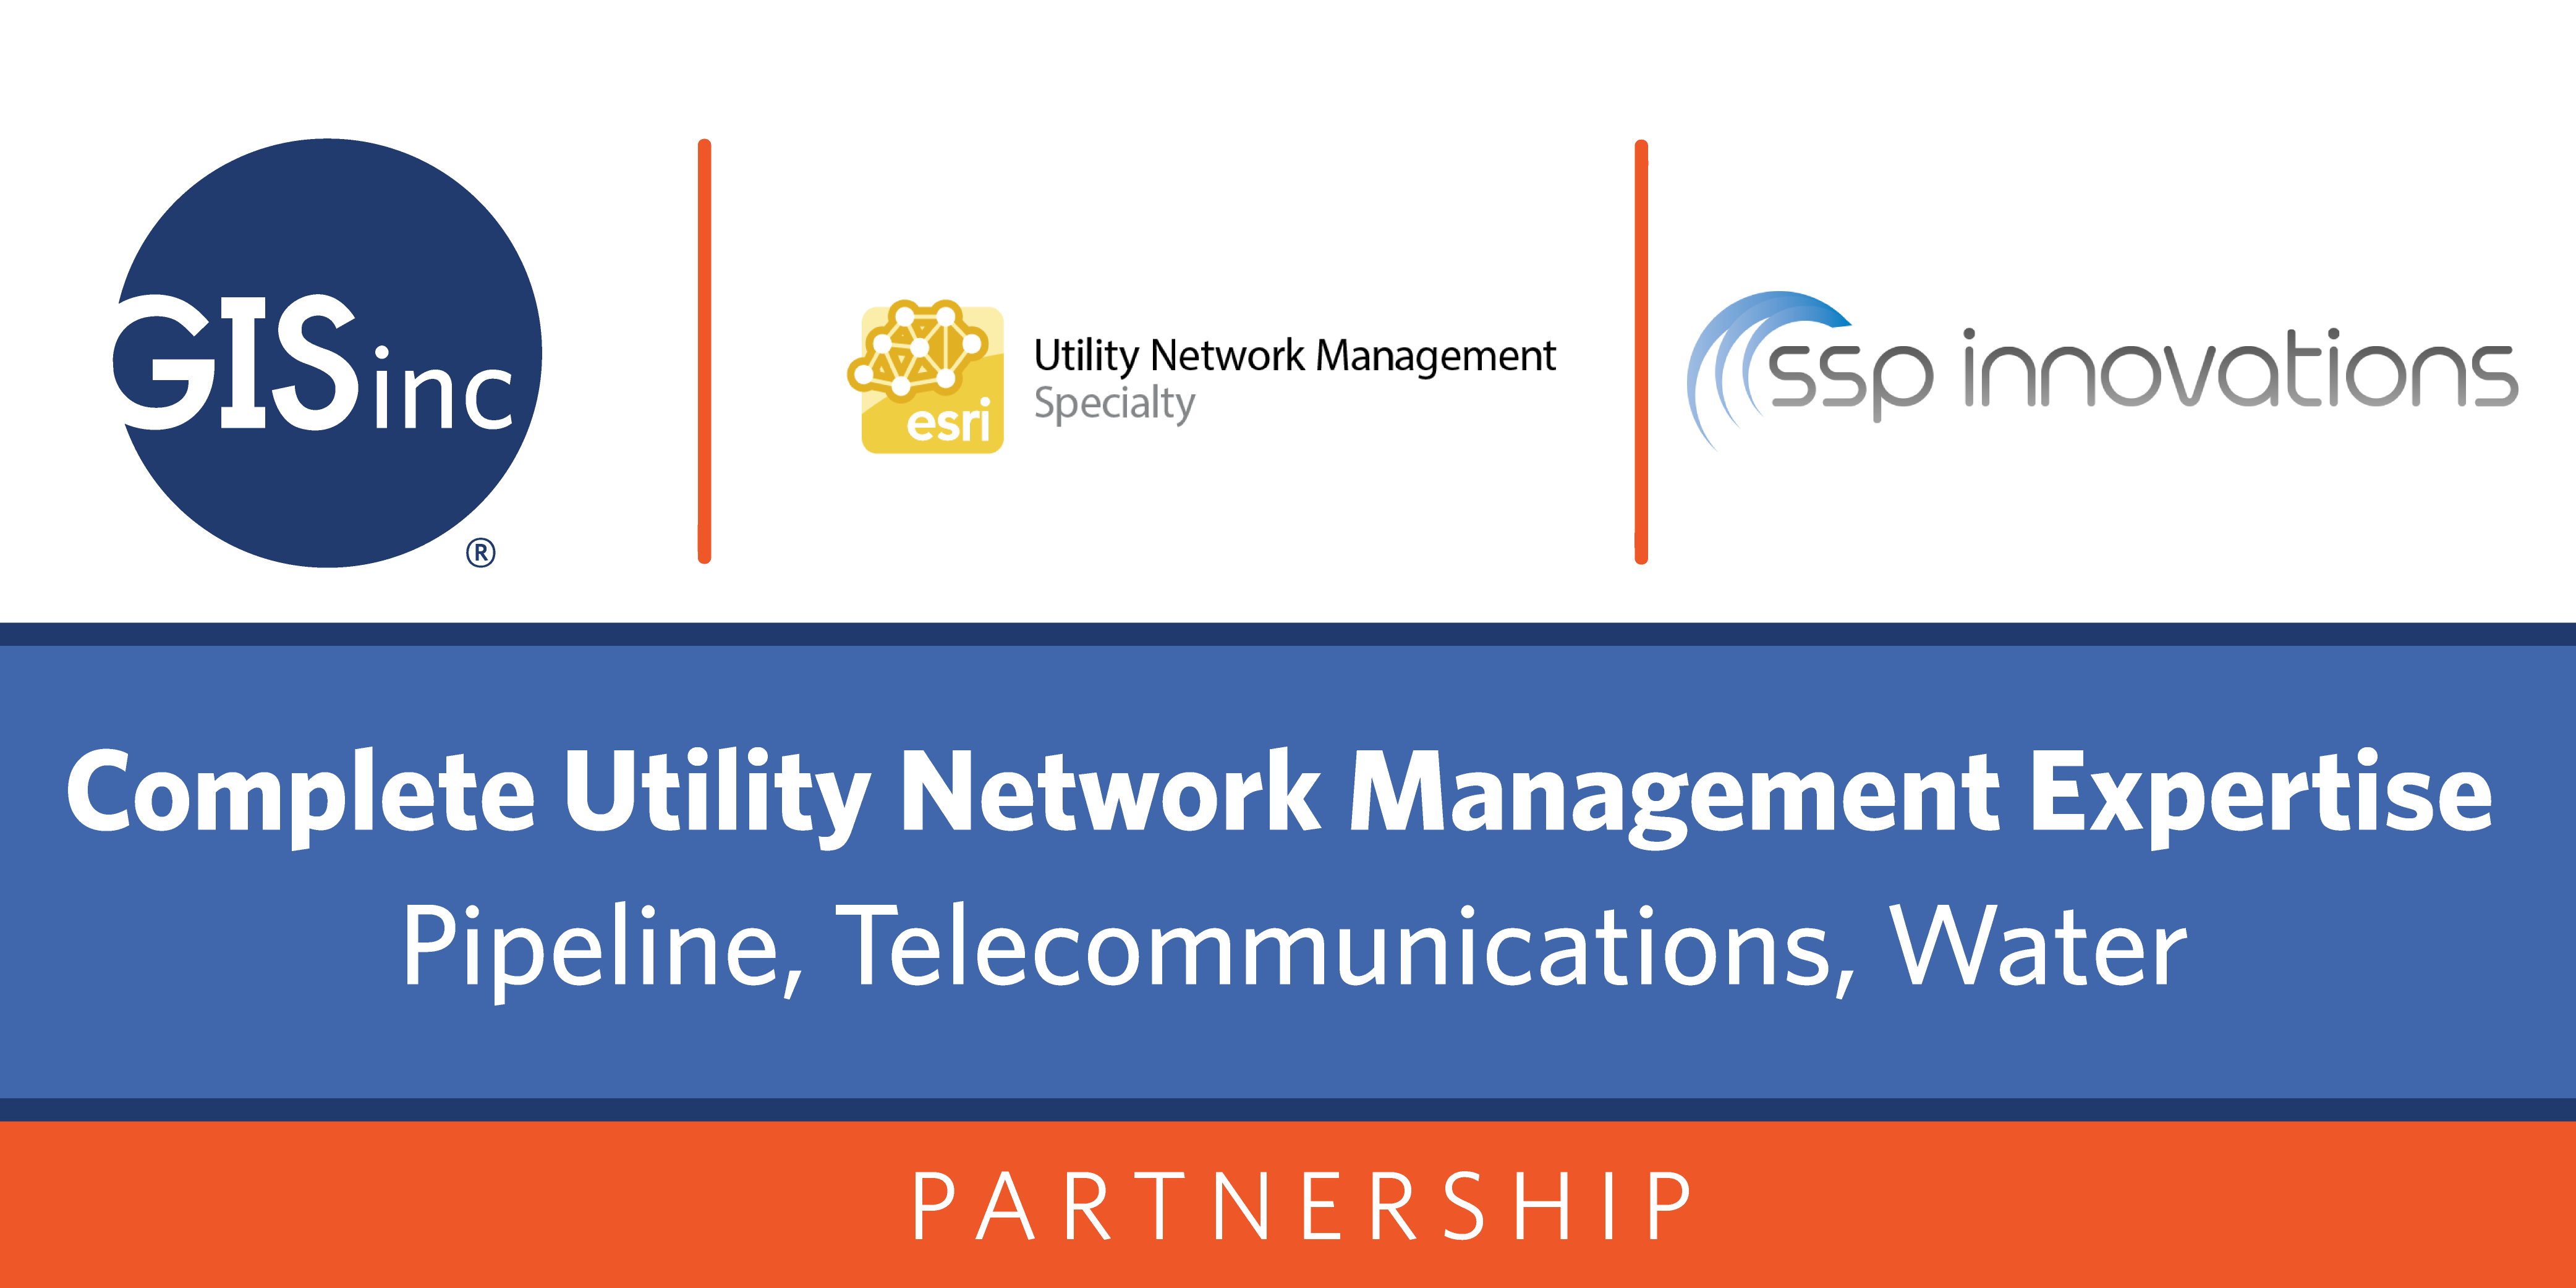 GISinc Partners with SSP Innovations for Complete Utility Network Management